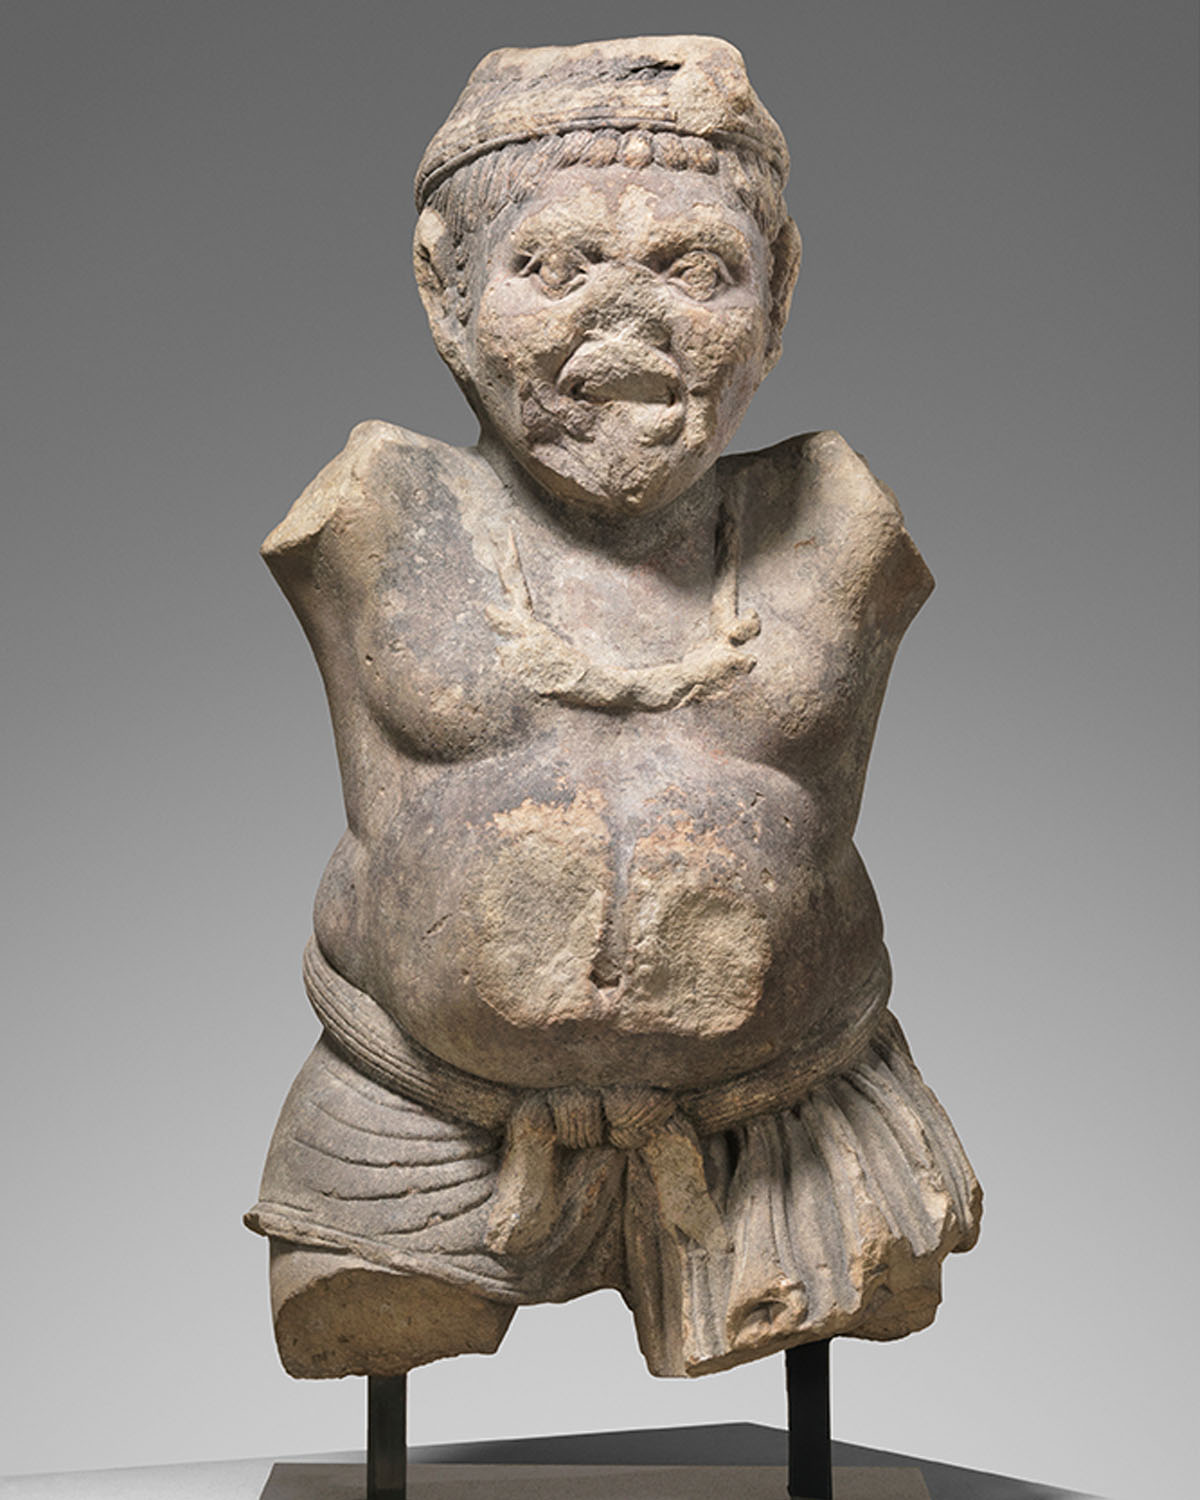 A stone sculpture with disfigured facial features, a protruding belly and missing limbs.